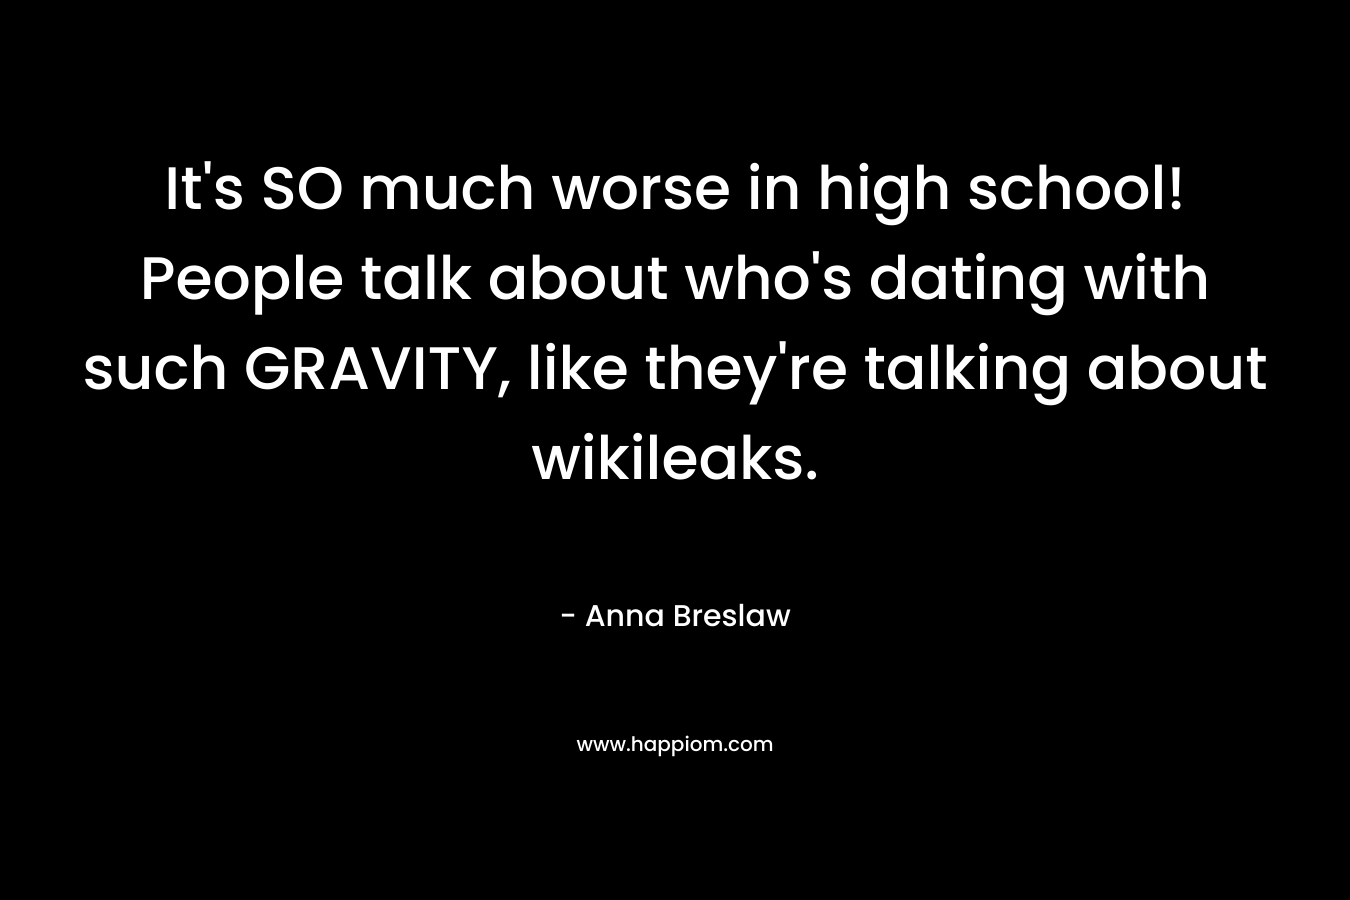 It’s SO much worse in high school! People talk about who’s dating with such GRAVITY, like they’re talking about wikileaks. – Anna Breslaw